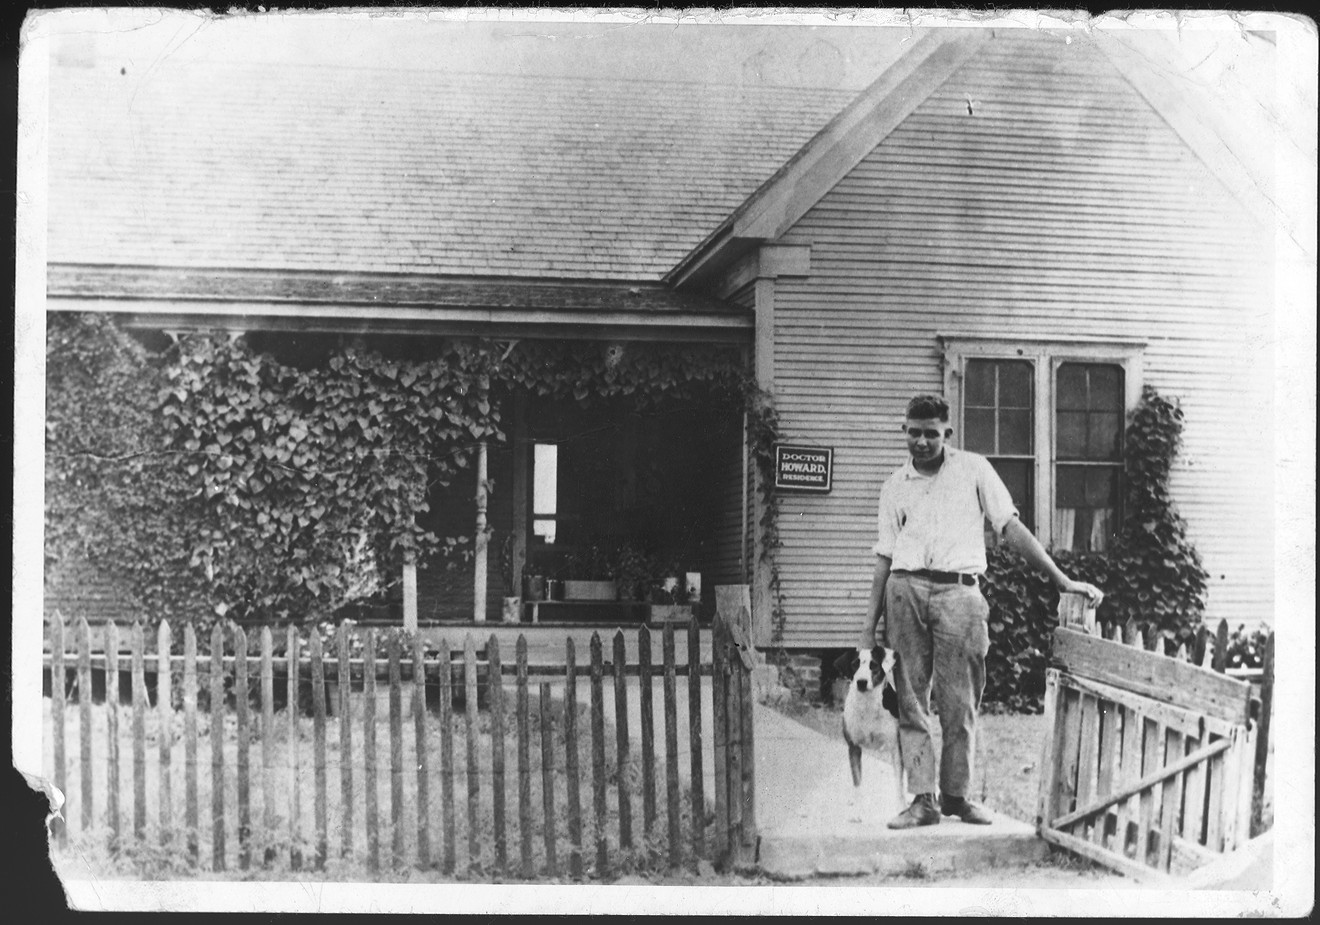 Robert E. Howard and his dog Patches in front of the Howard house, Cross Plains, Texas, (date unknown).